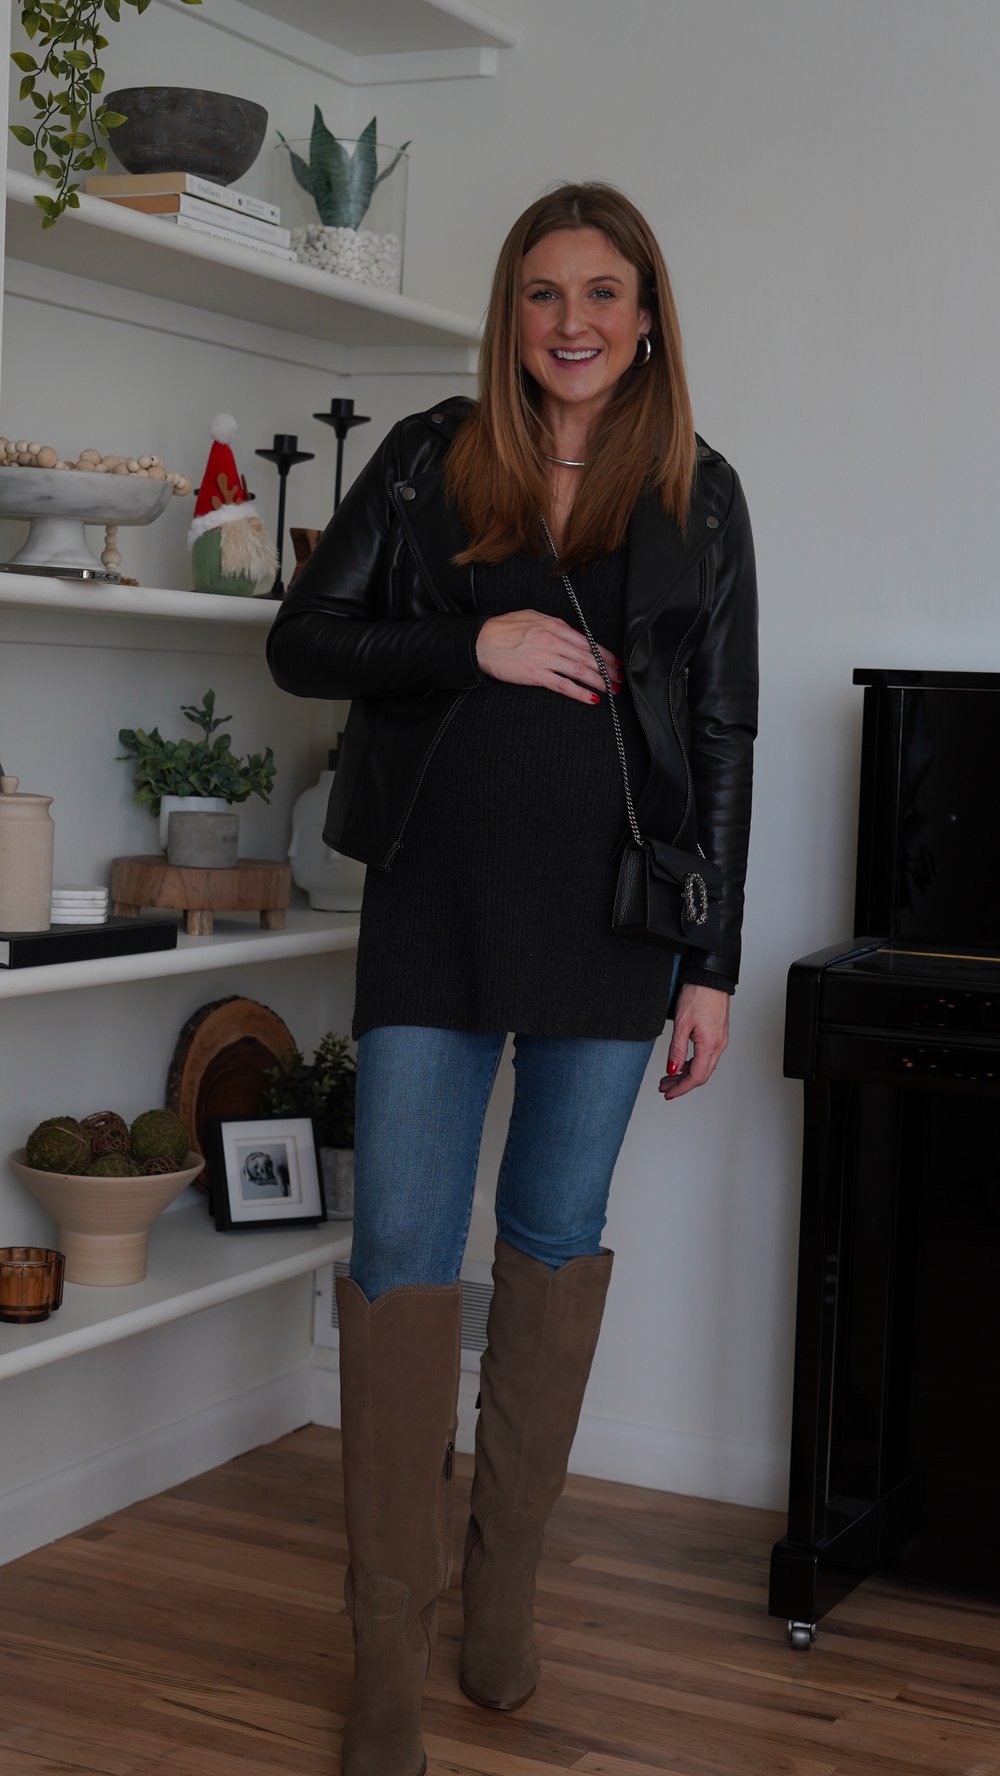  Jessica Ashley wears The Jacket Maker Flashback leather jacket in size XS with JBrand maternity denim,  Blondo suede boots, grey sweater tunic and Gucci Dionysus small cross body bag | best leather jackets for women 